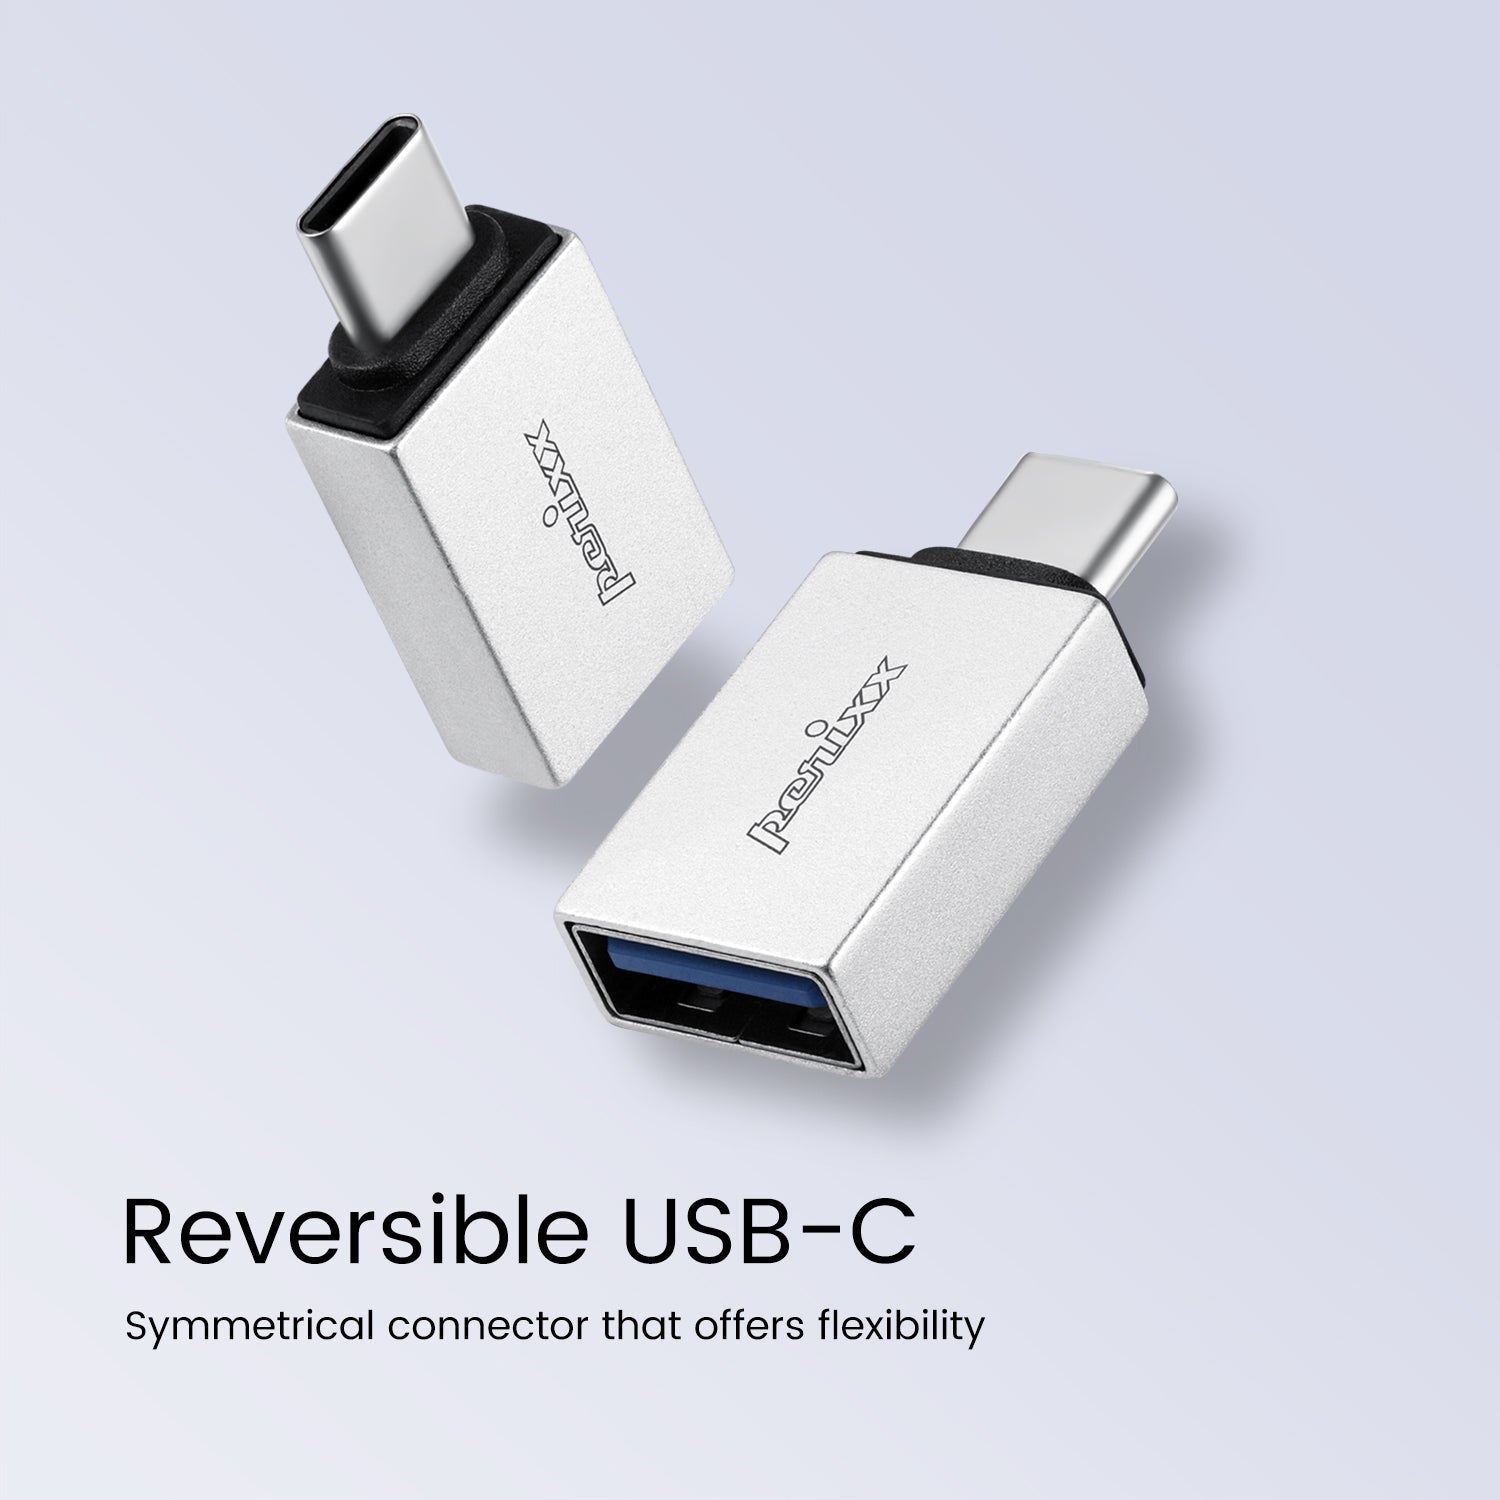 PERIPRO-404 - USB-A to USB-C Dongle Adapter - Perixx Europe